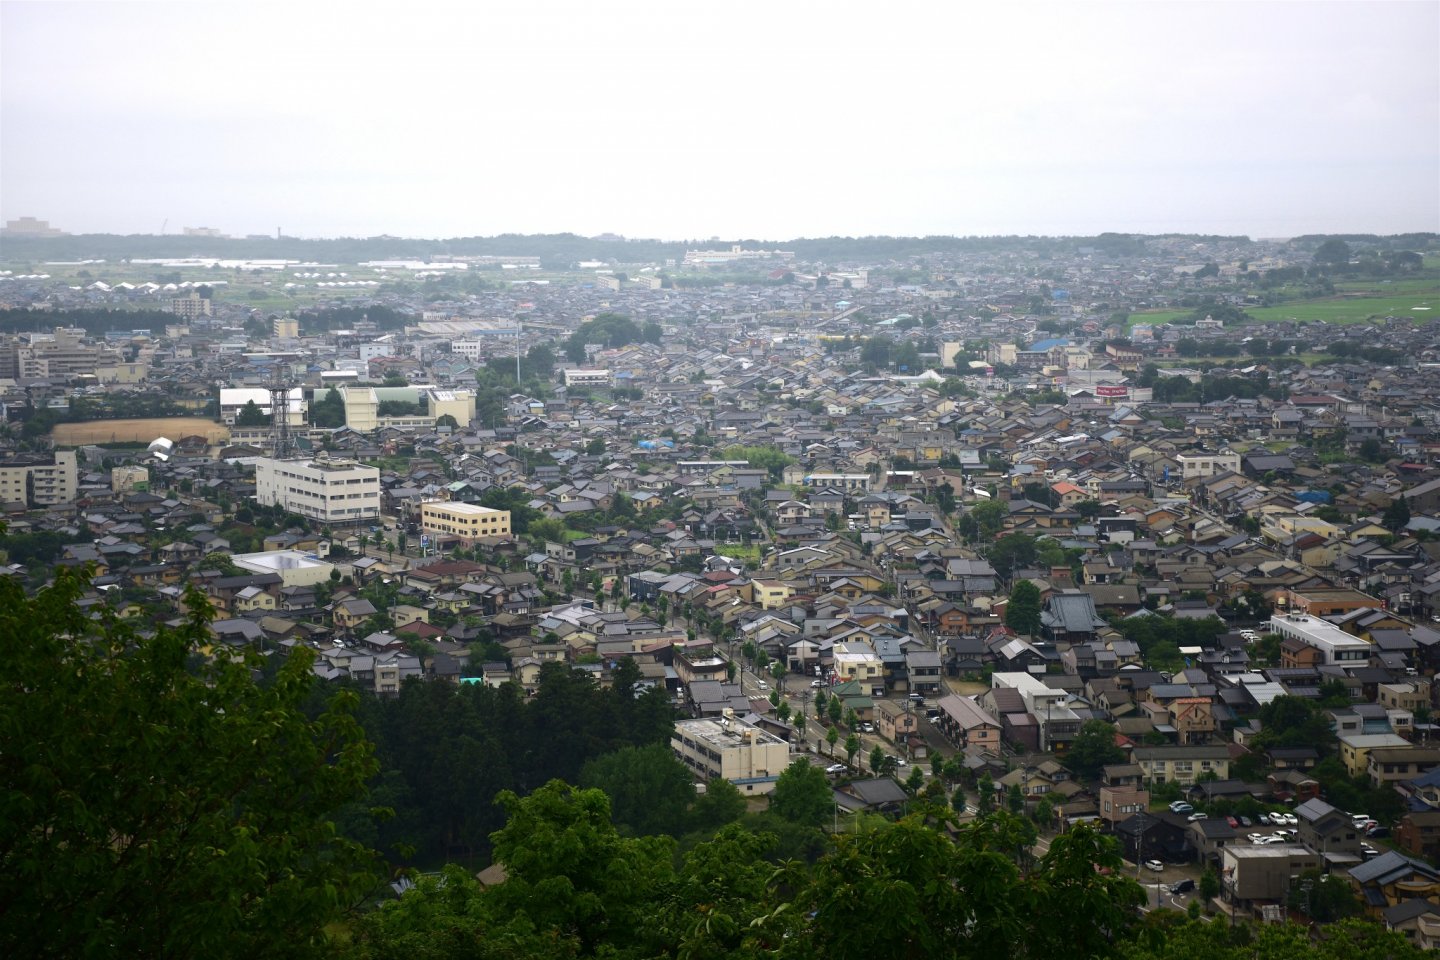 View from Murakami Castle